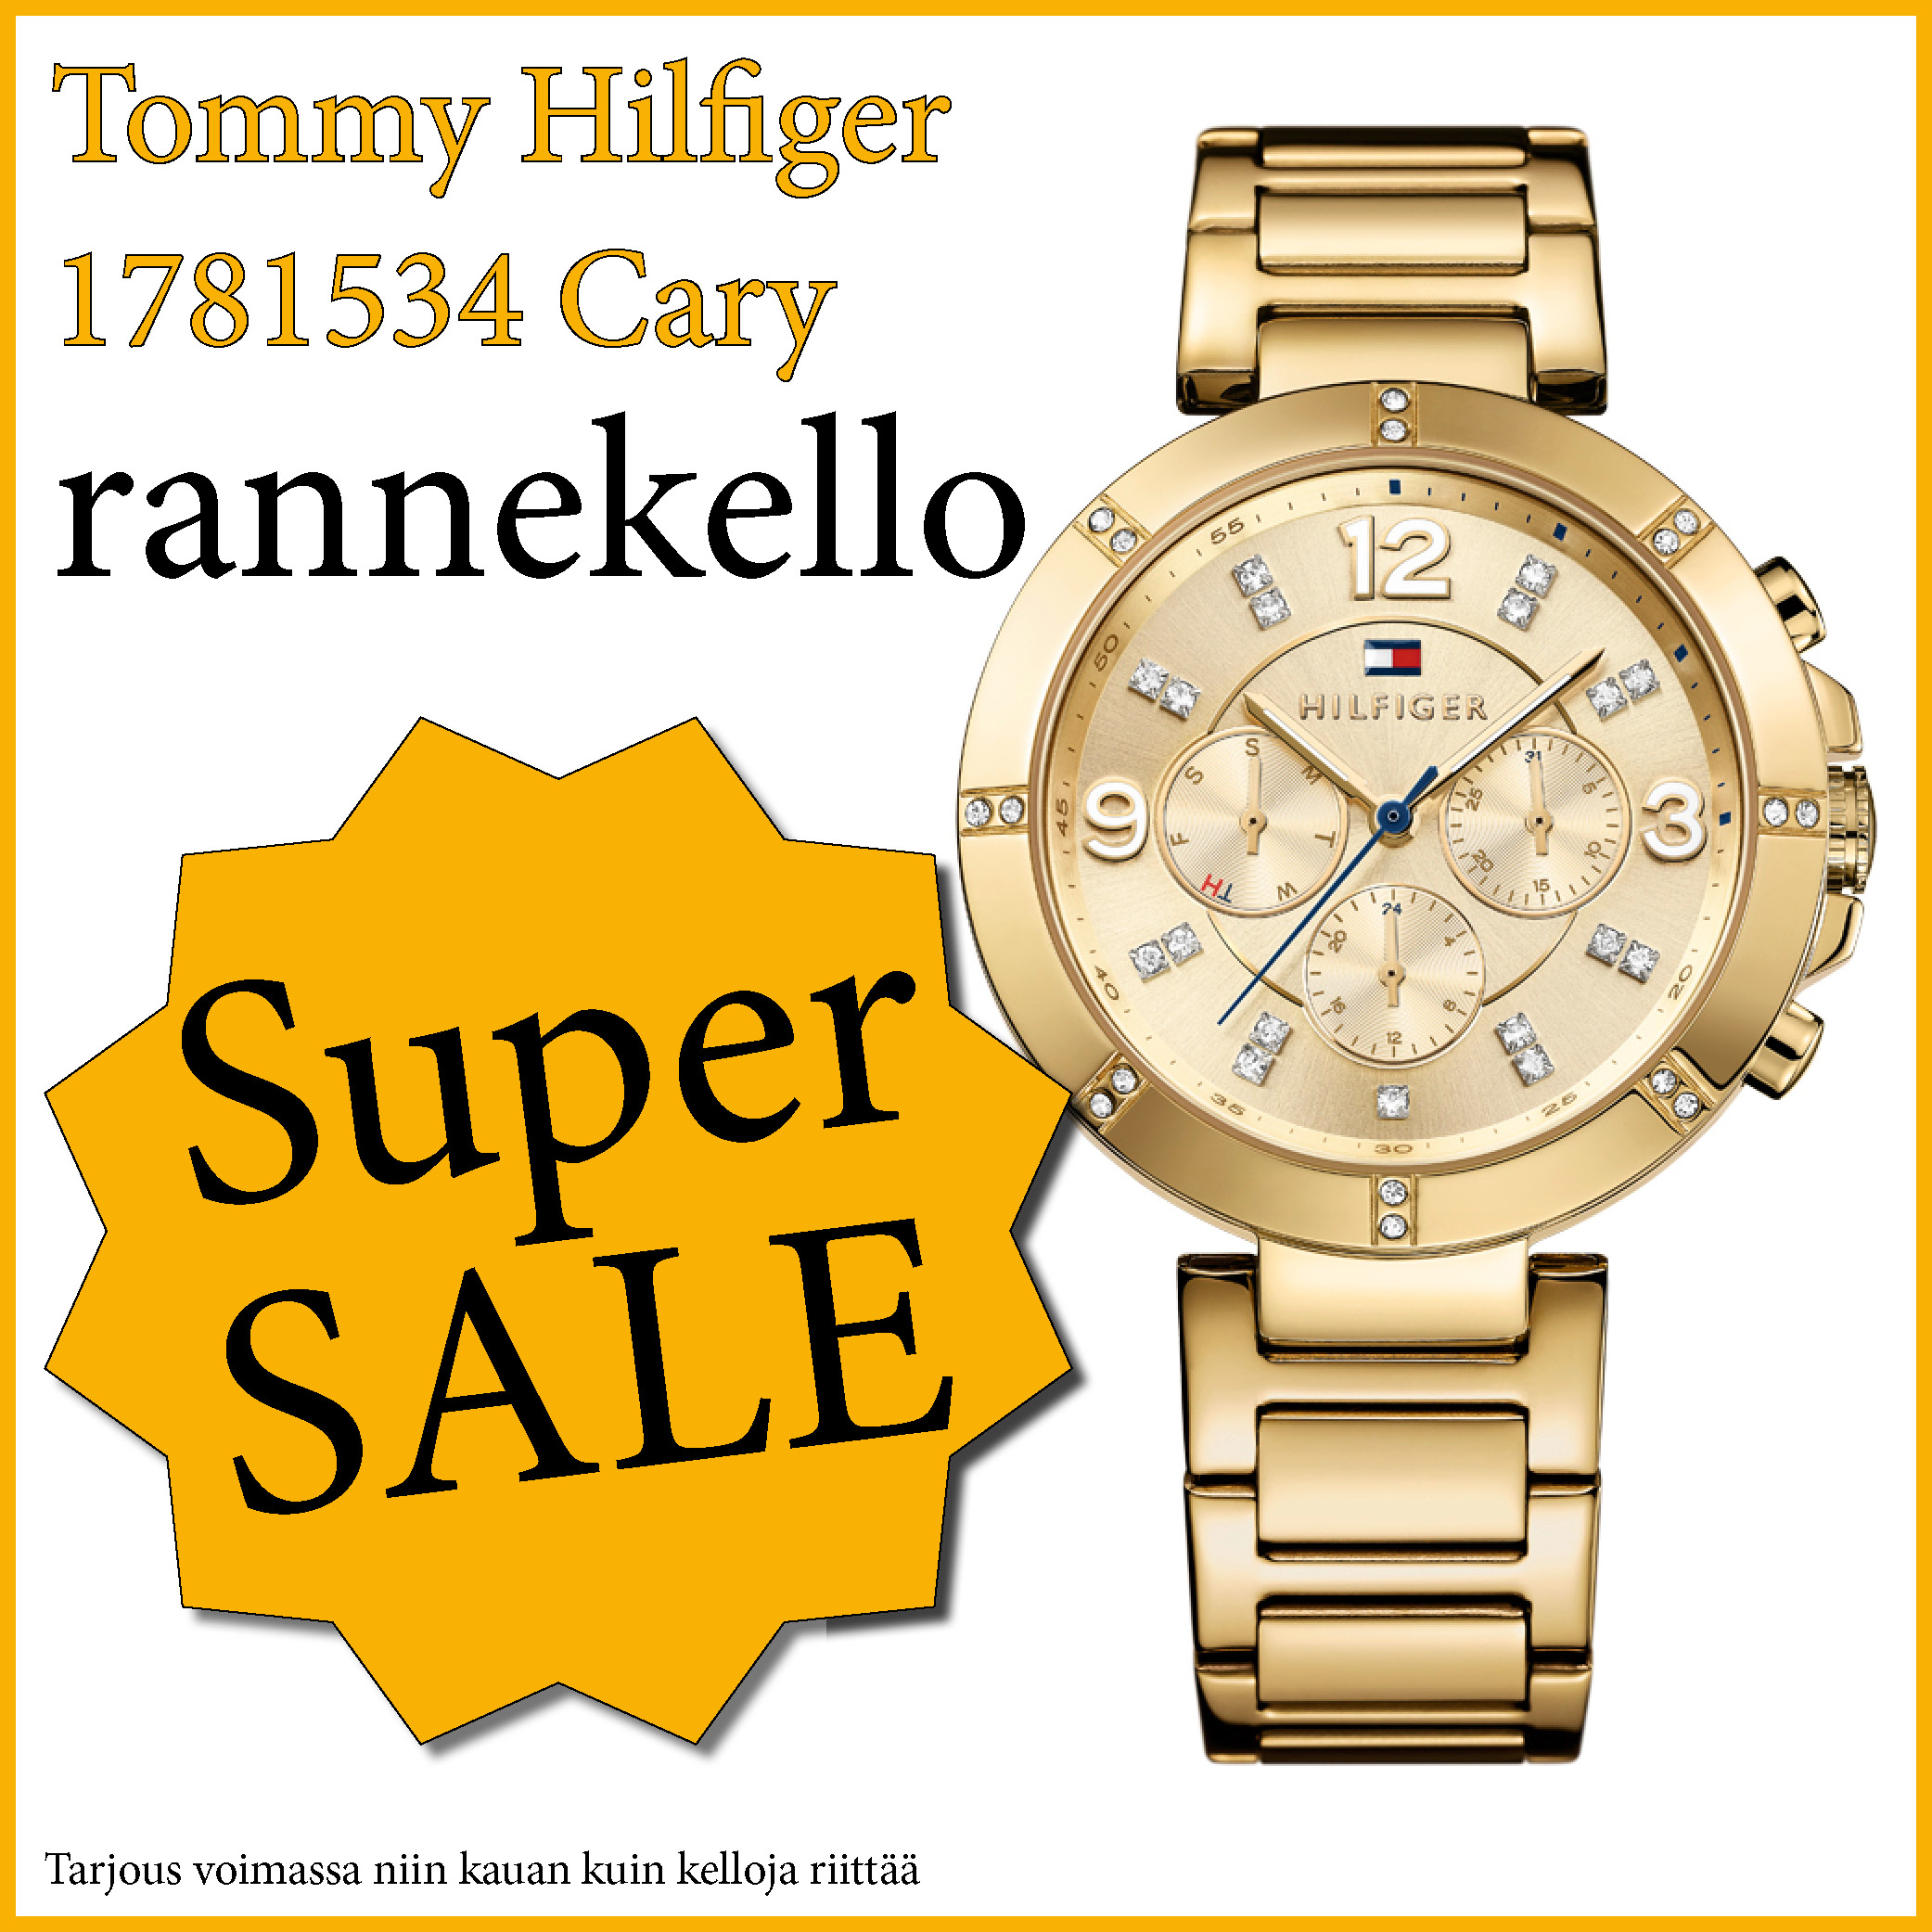 TOMMY HILFIGER 1781534 CARY RANNEKELLO